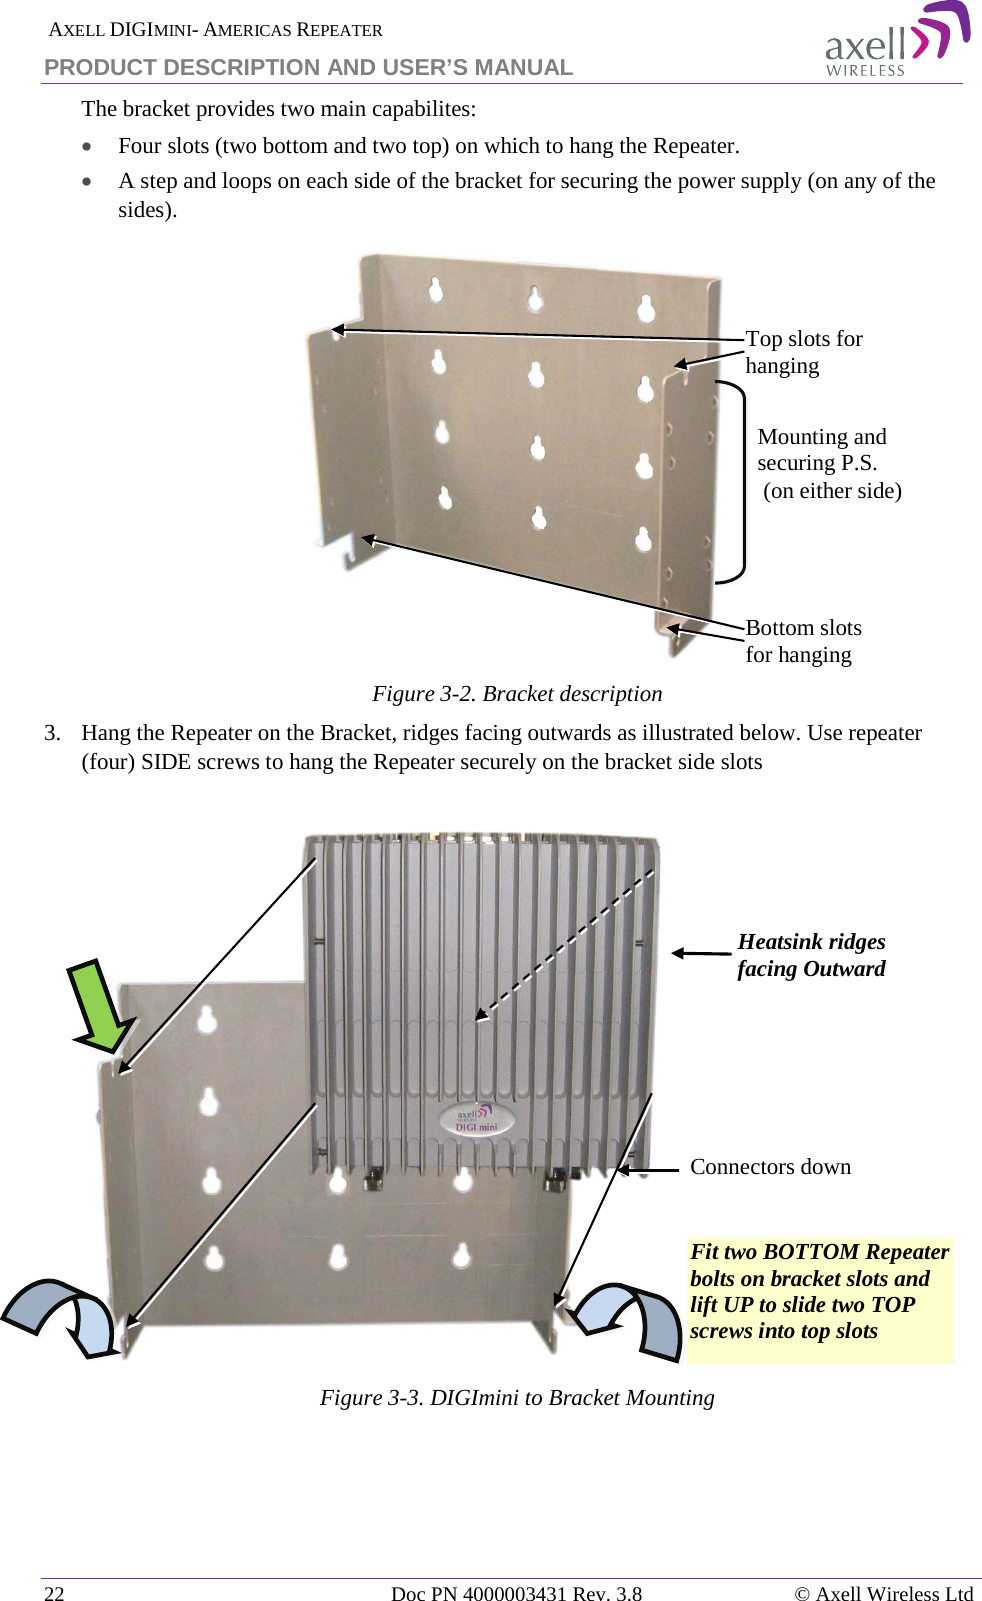  AXELL DIGIMINI- AMERICAS REPEATER PRODUCT DESCRIPTION AND USER’S MANUAL 22   Doc PN 4000003431 Rev. 3.8 © Axell Wireless Ltd The bracket provides two main capabilites:  • Four slots (two bottom and two top) on which to hang the Repeater. • A step and loops on each side of the bracket for securing the power supply (on any of the sides).  Figure  3-2. Bracket description 3.   Hang the Repeater on the Bracket, ridges facing outwards as illustrated below. Use repeater (four) SIDE screws to hang the Repeater securely on the bracket side slots                 Figure  3-3. DIGImini to Bracket Mounting           Connectors down Top slots for hanging  Bottom slots for hanging Mounting and securing P.S.  (on either side)  Heatsink ridges facing Outward  Fit two BOTTOM Repeater bolts on bracket slots and lift UP to slide two TOP screws into top slots 